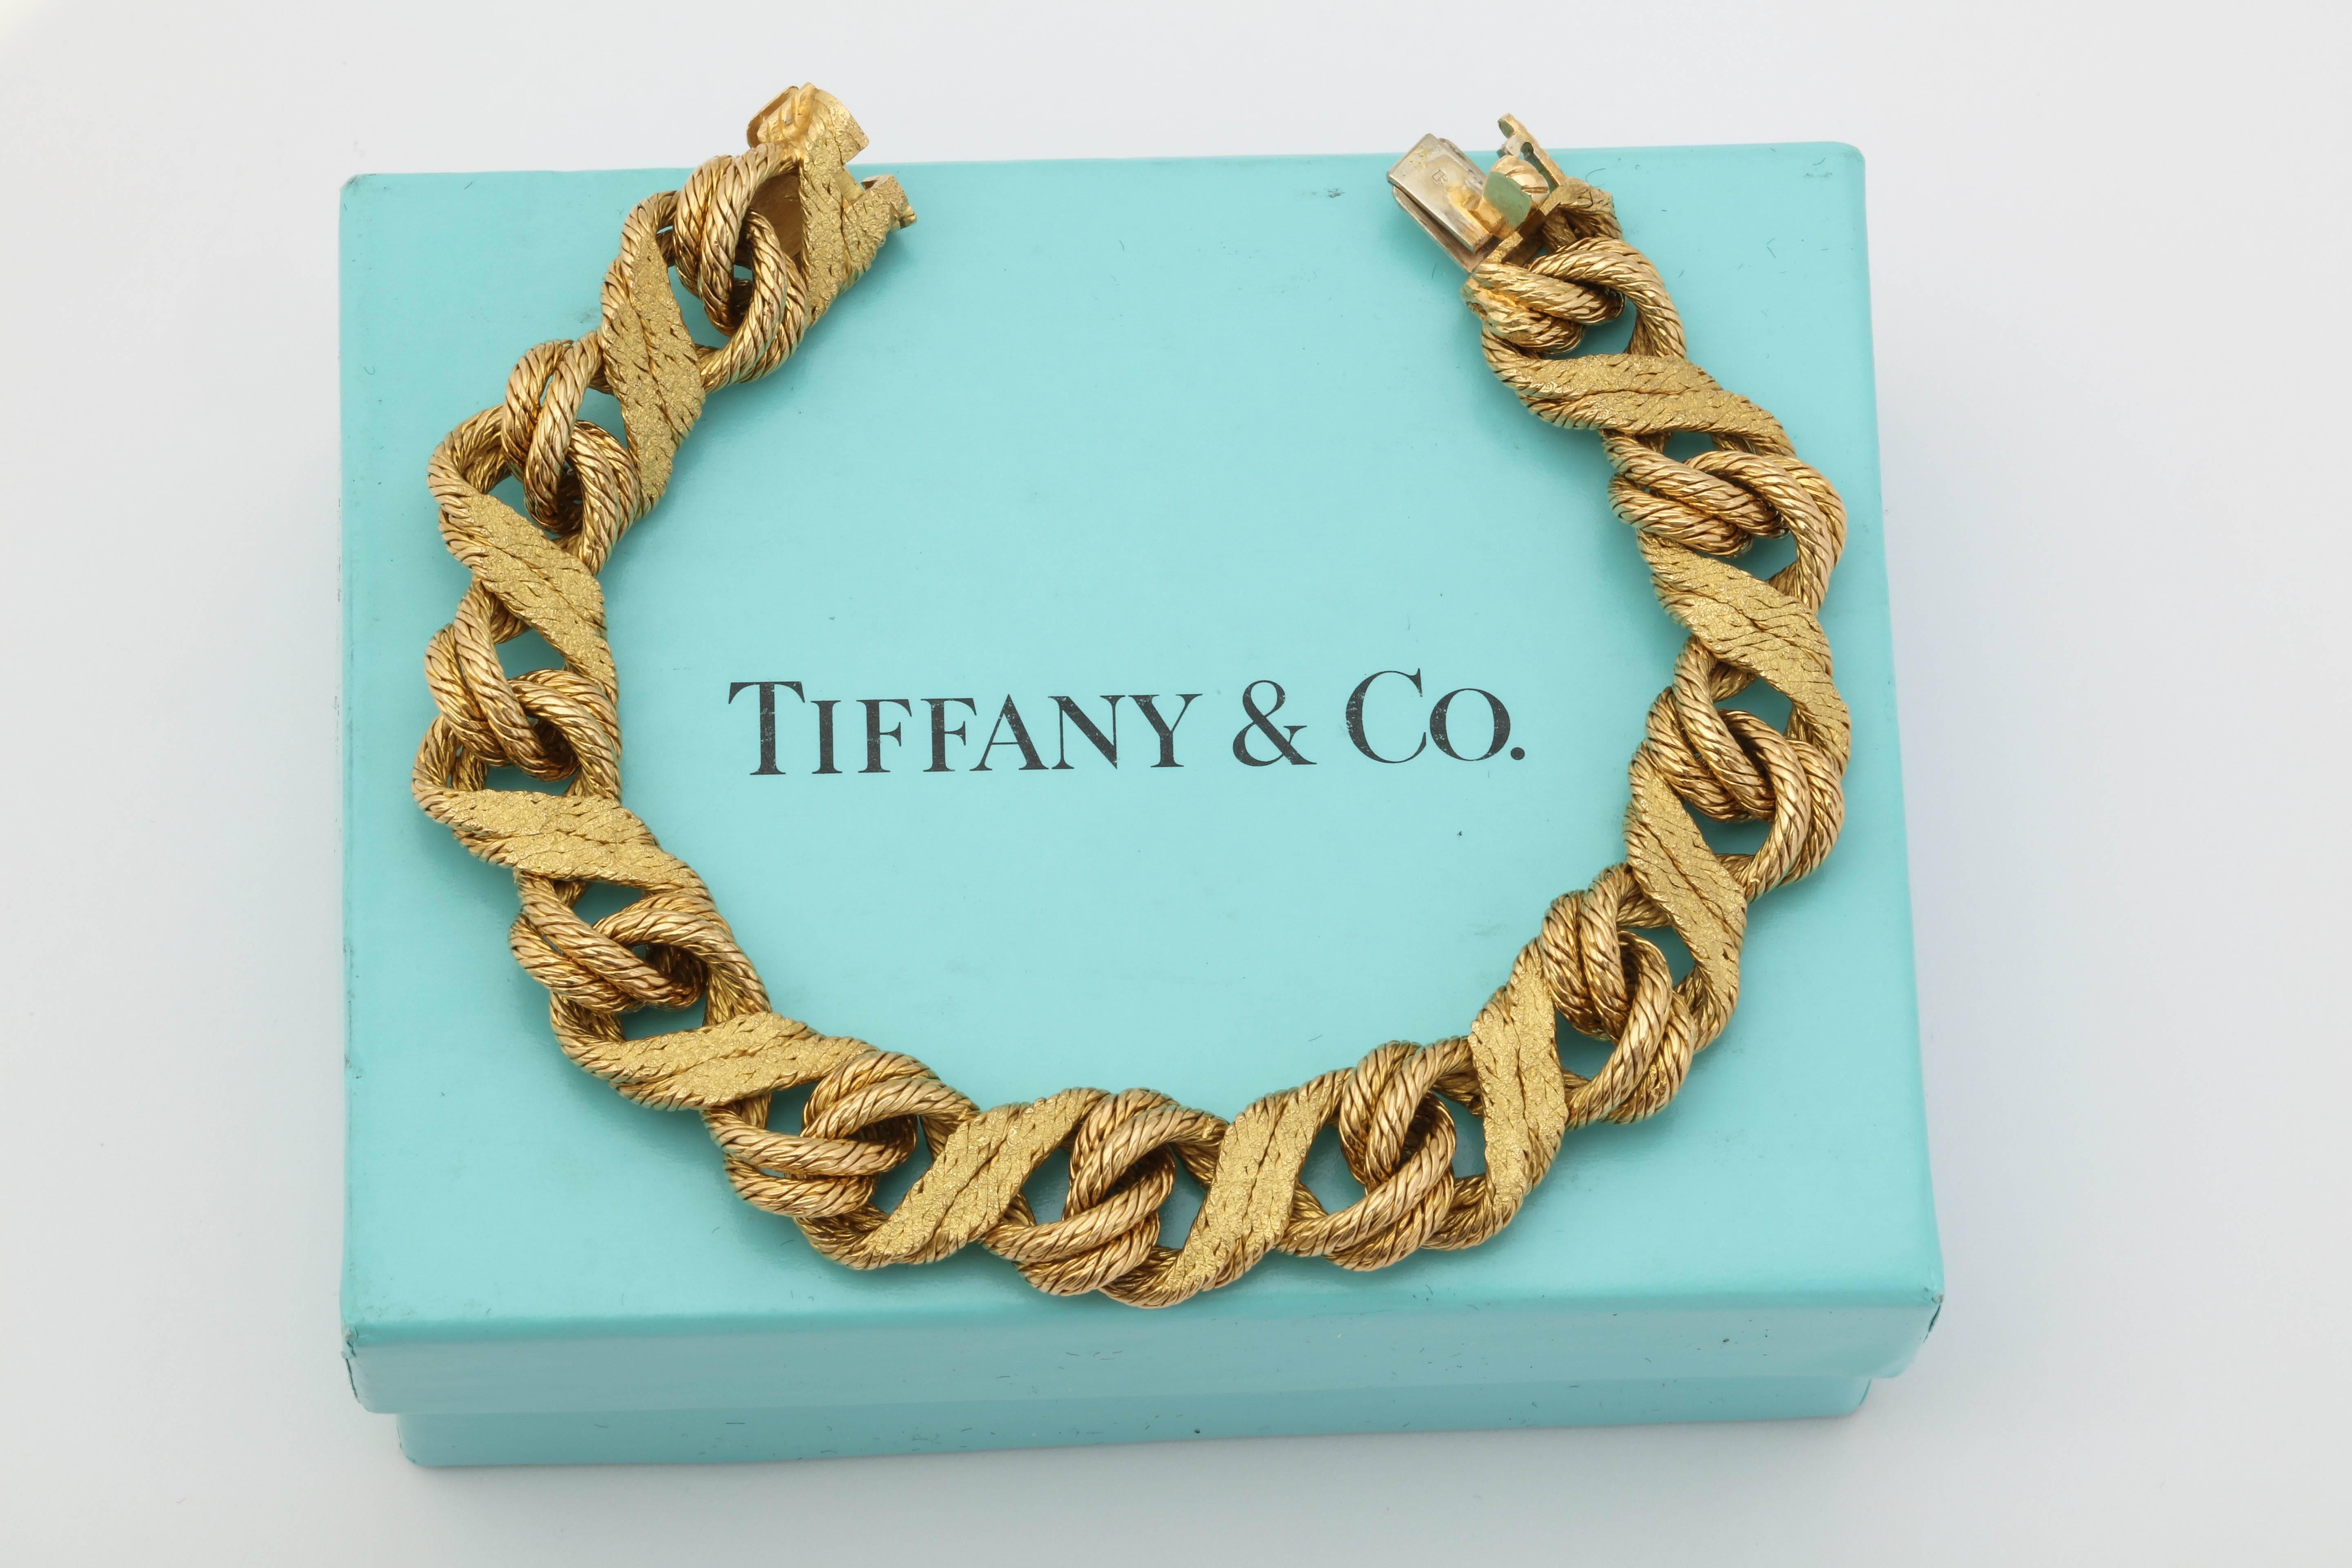 One Unisex Bracelet Created In Two Types Of Textured 18kt Yellow Gold , One In A Solid Twisted  Rope Design Texture And The Other Intertwined Link Crafted In A Flat Golden Nugget Design. Flexible Link May Be Worn Reversed In The Solid Twisted Gold